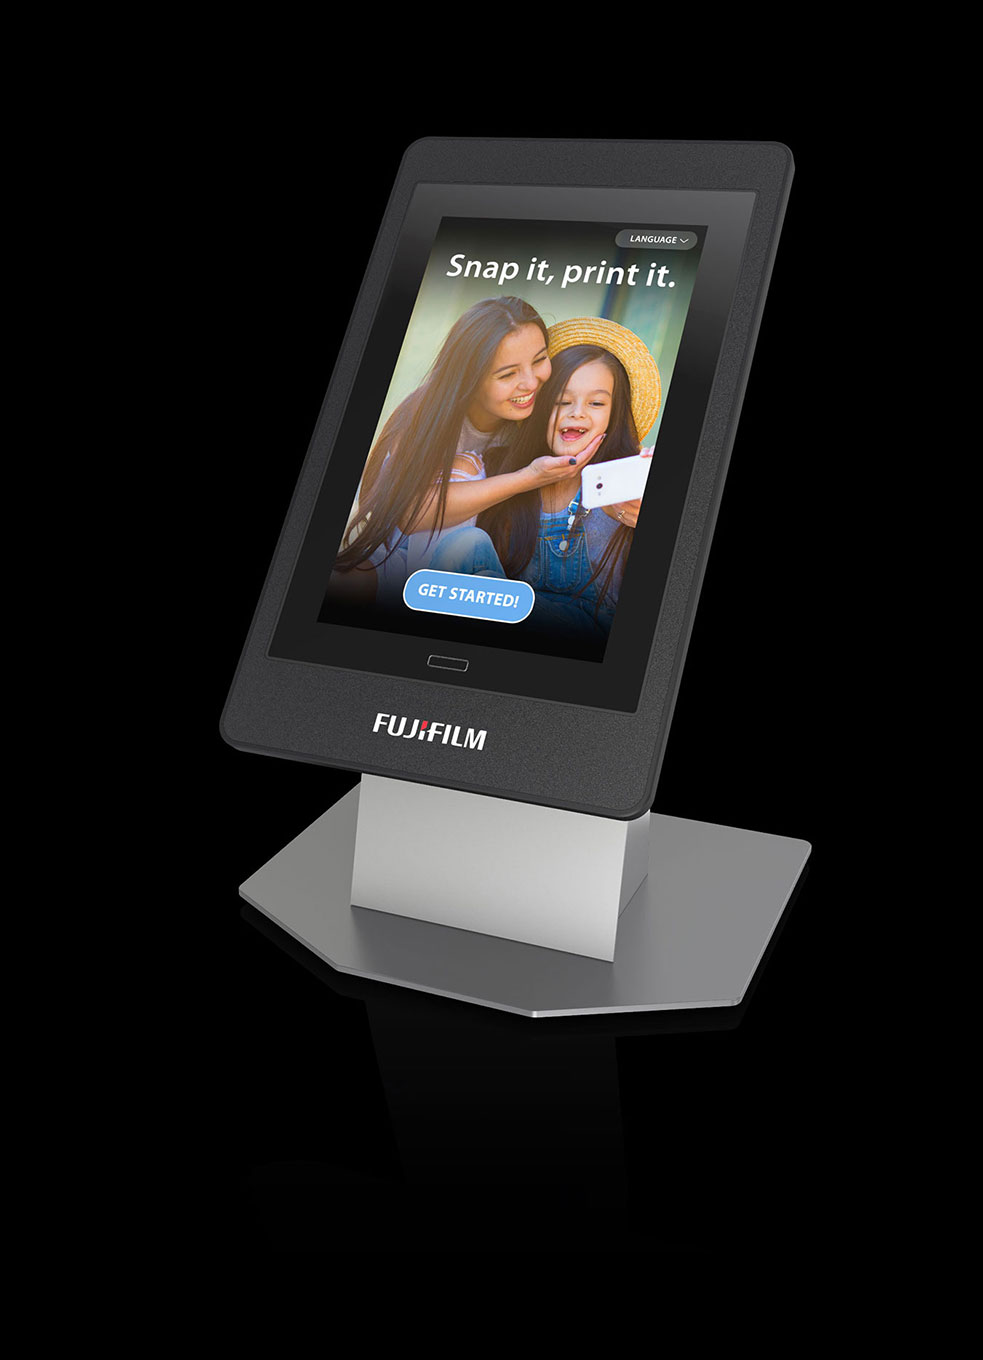 Sleek Fujifilm kiosk for printing photos at a retail counter with a beautiful touch screen.